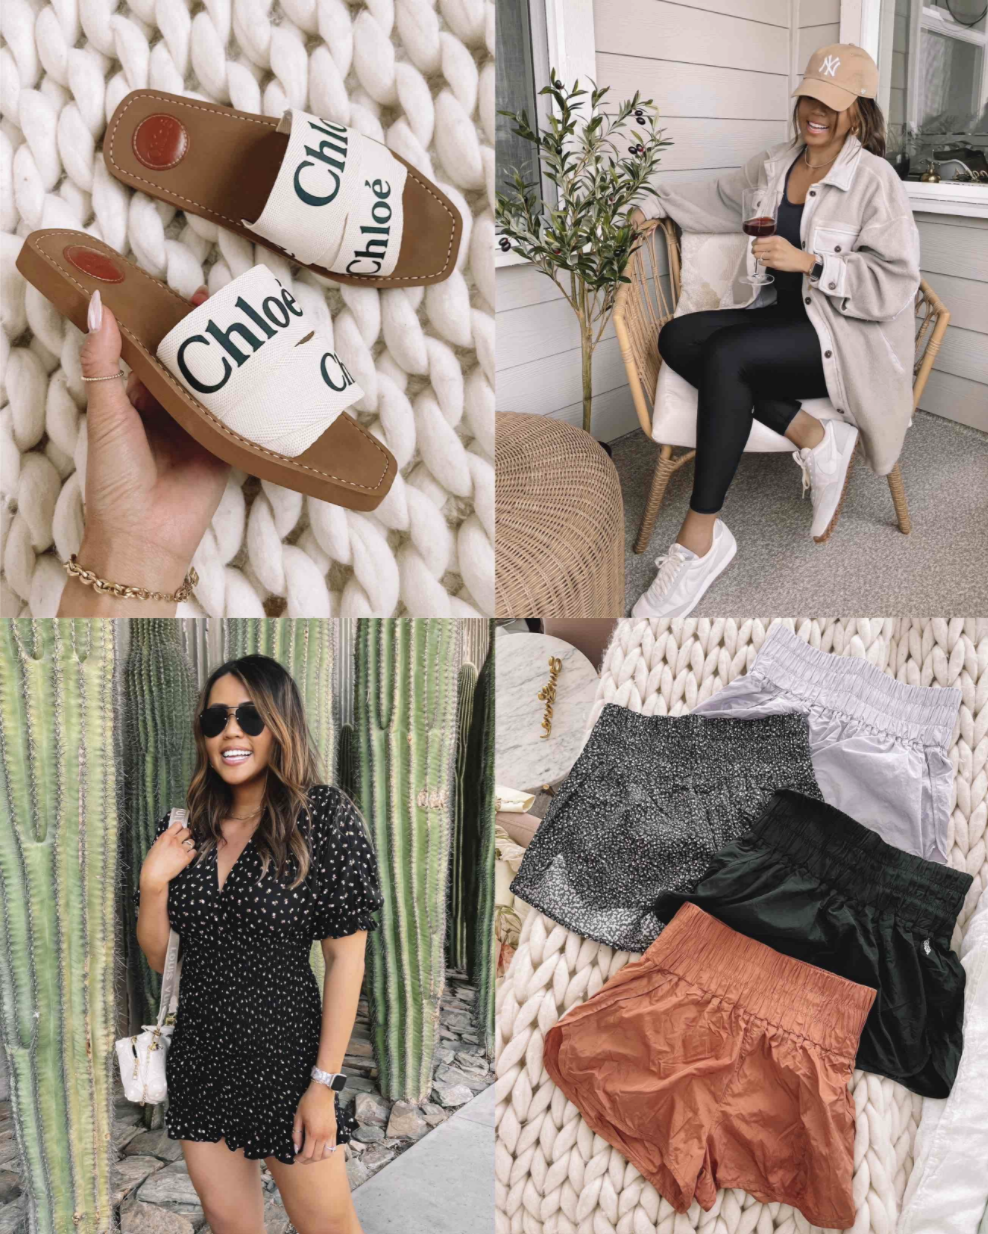 Best Sellers April 2021 - Free People Sale - Best Workout Shorts - Chloe Woody Sandals Review - Nike Air Max 270 Review